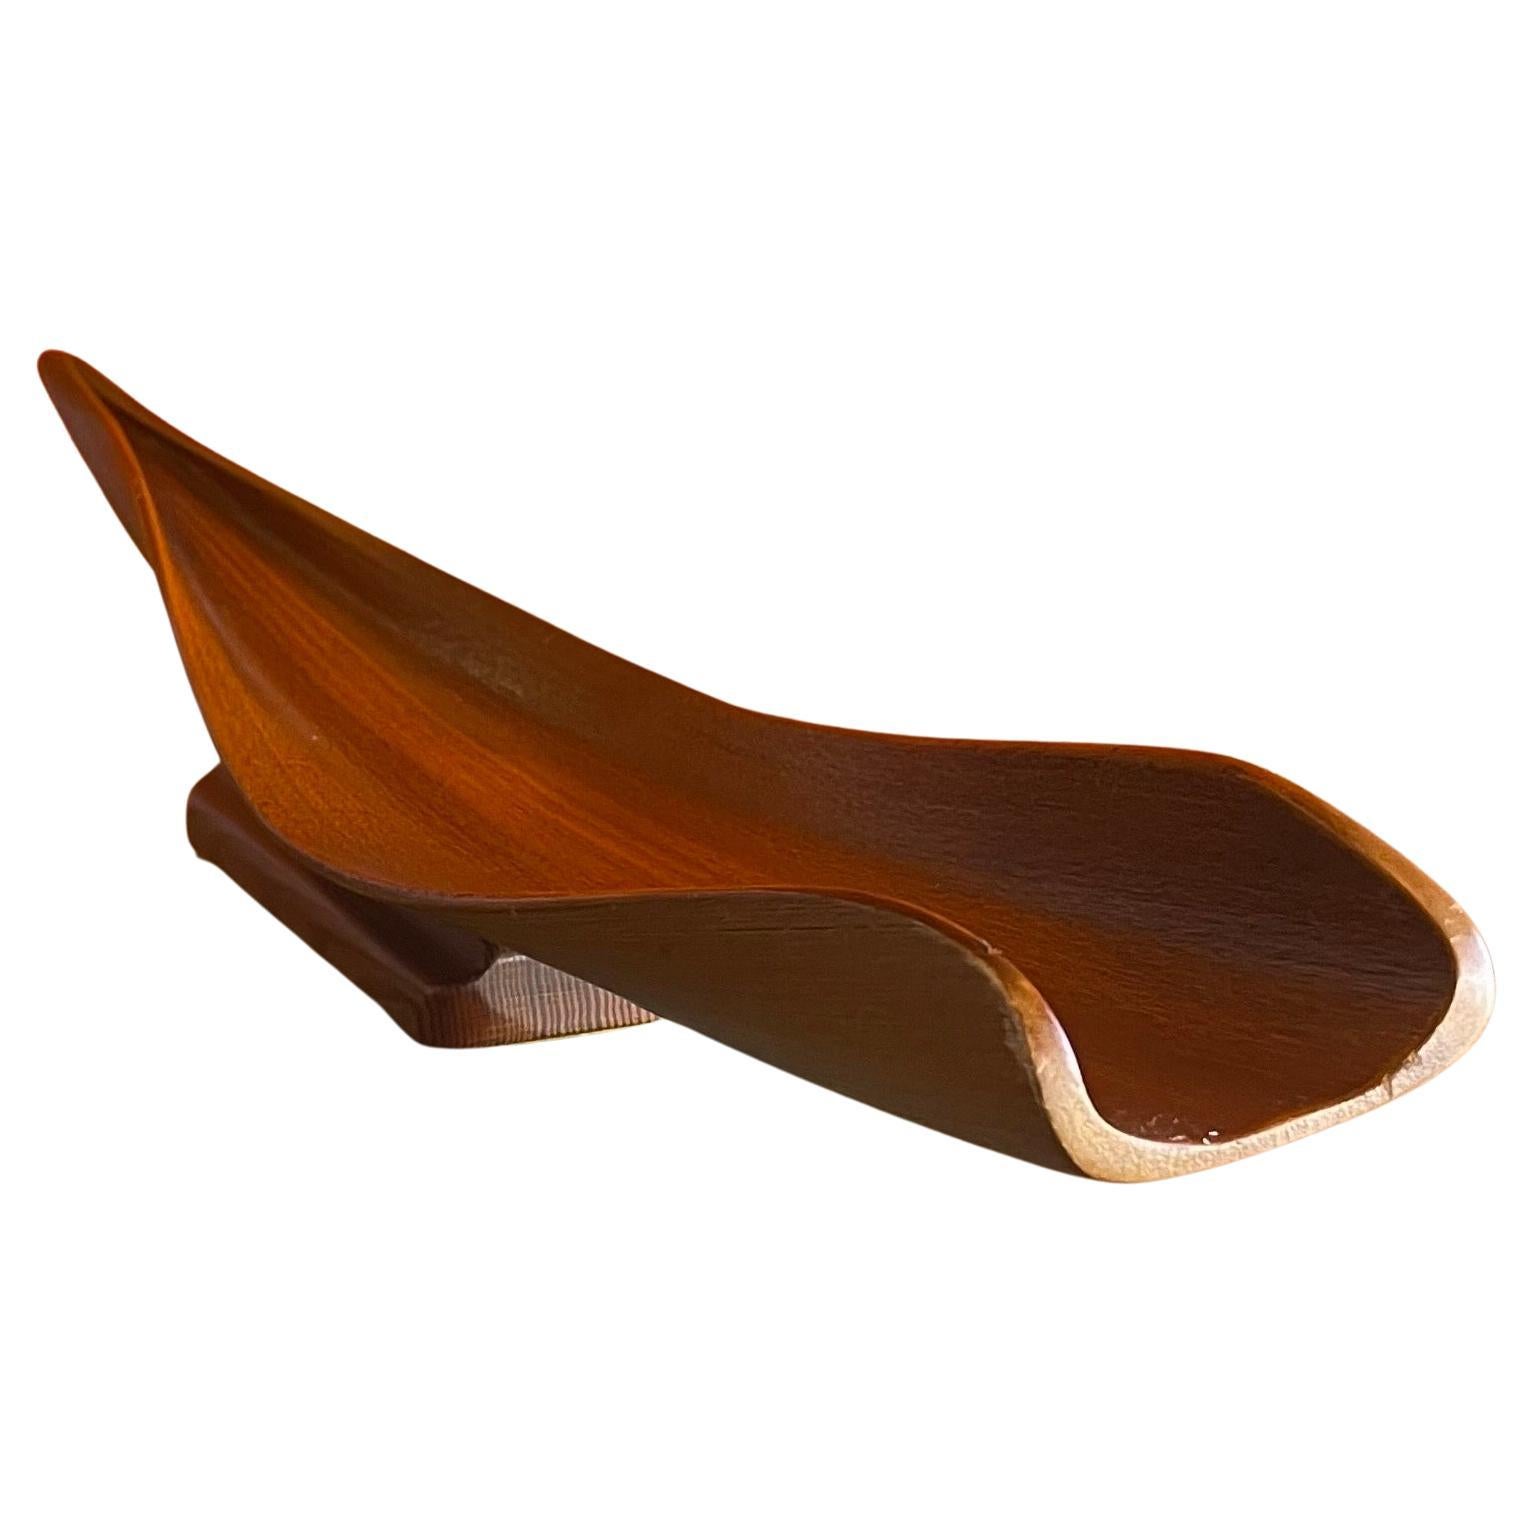 A very cool Mid-Century Modern palm frond / leaf sculpture on base in teak, circa 1970s. The piece is in very good vintage condition and measures 17.5W x 4